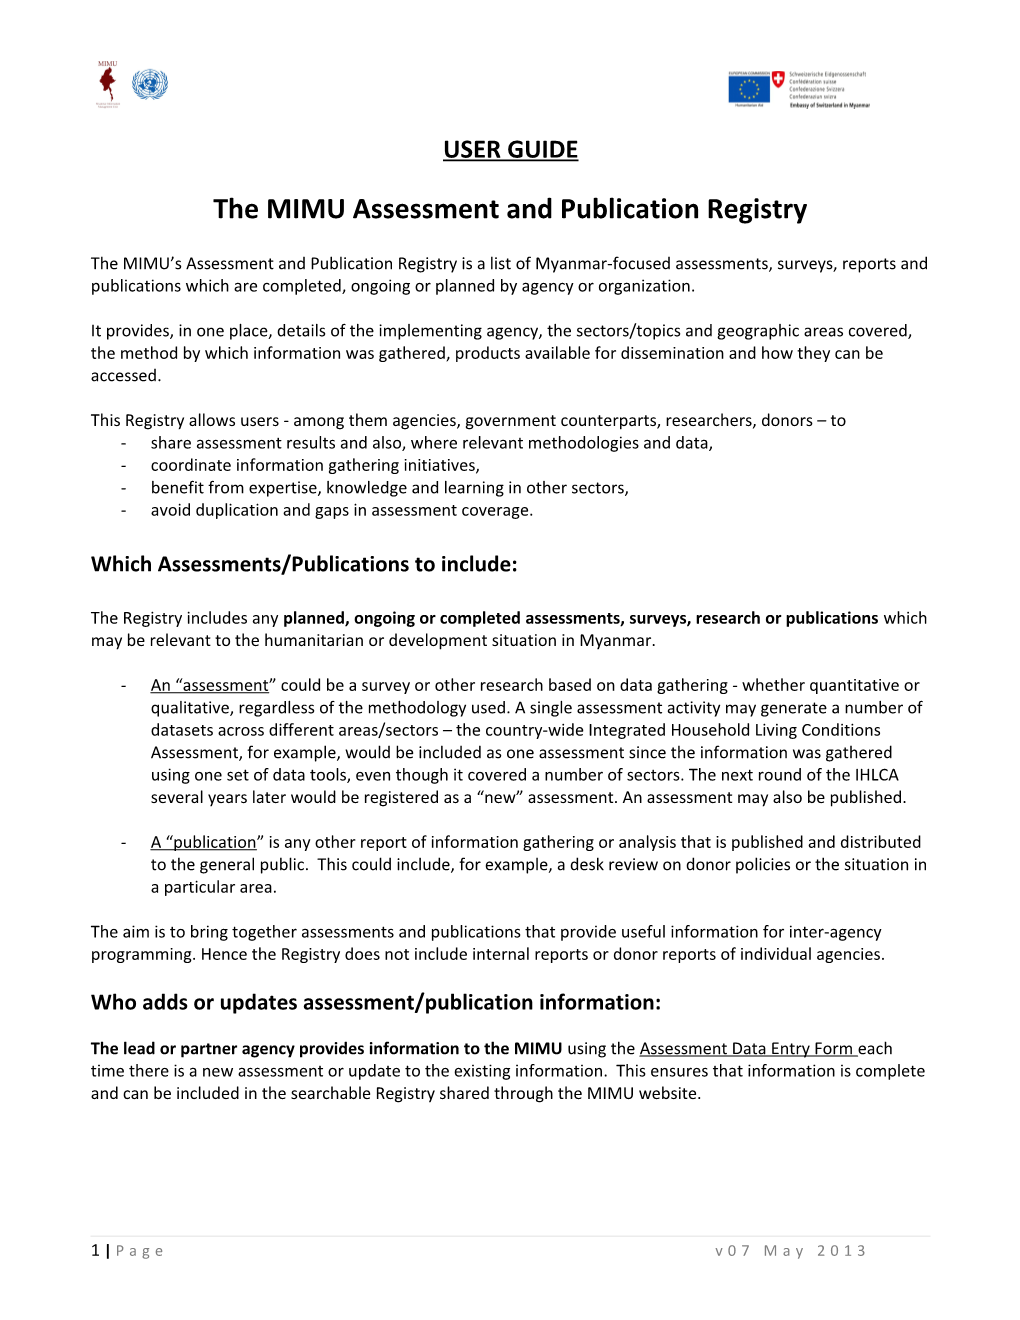 The MIMU Assessment and Publication Registry